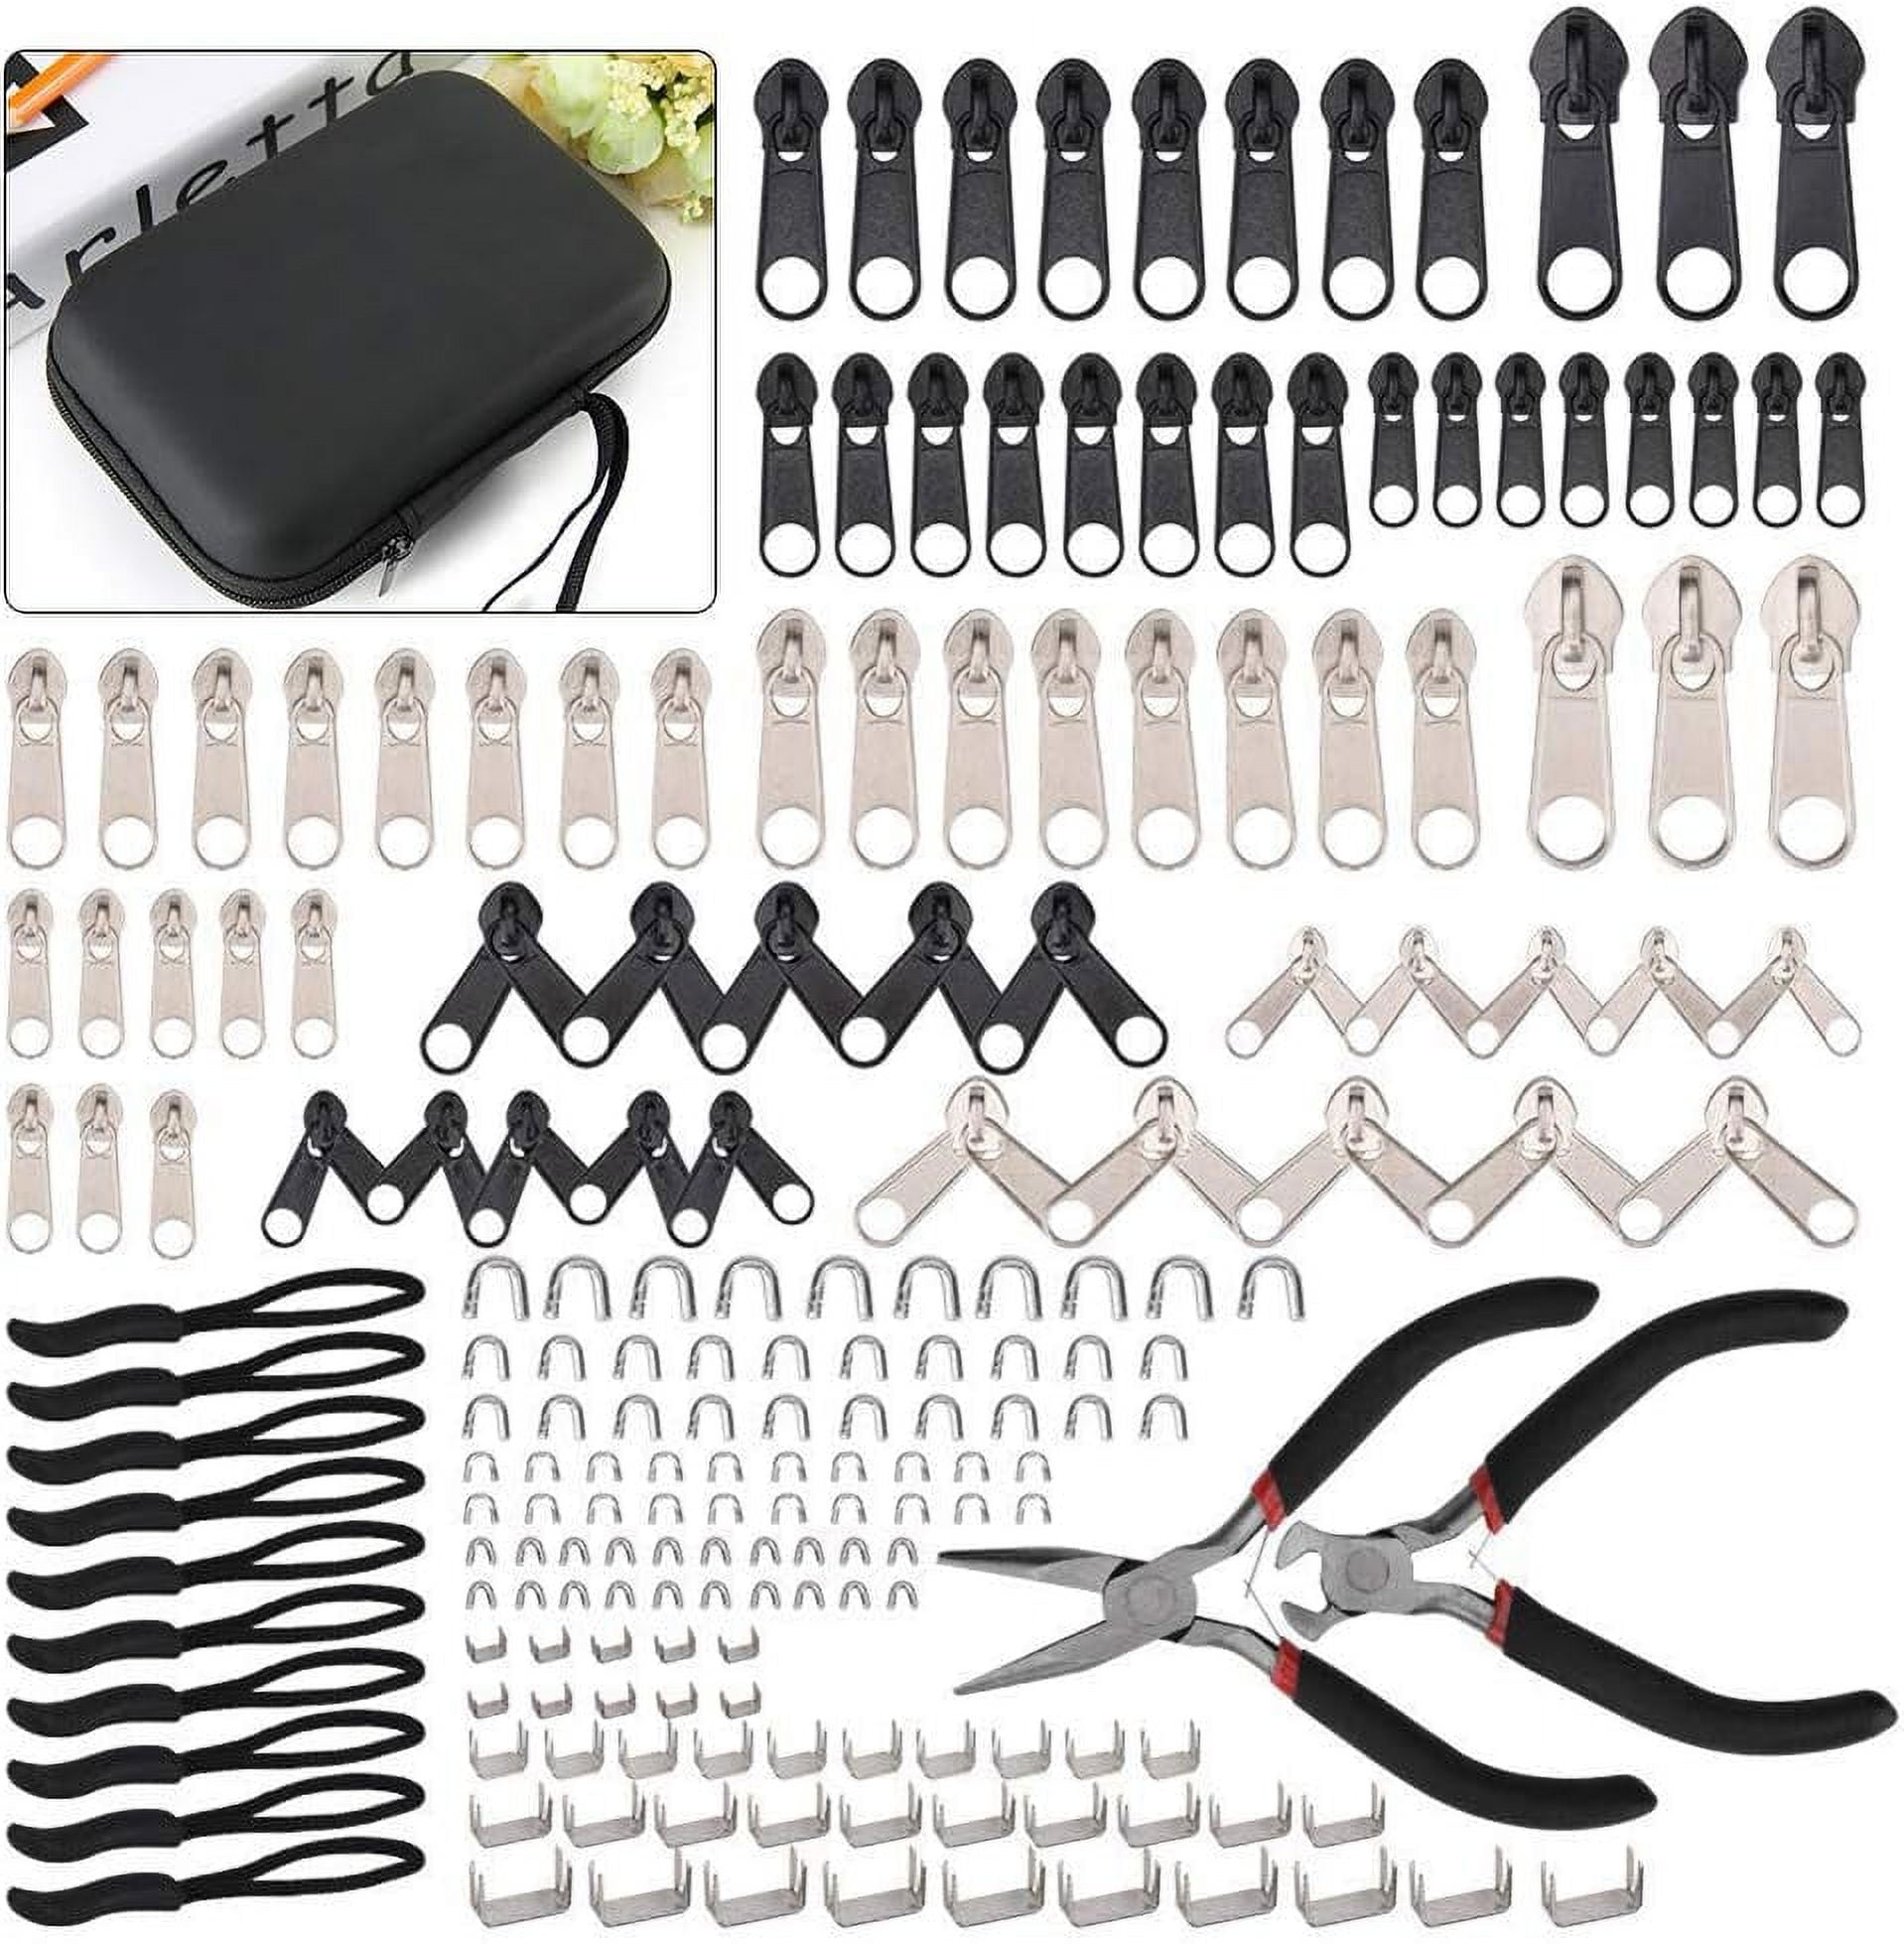 Zipper Repair Kit with Replacement Zippers [197pcs] Zipper Fix Kit & Replacement Zipper Slider Set with Pliers - Ideal for Fixing Luggage, Coats, Jean